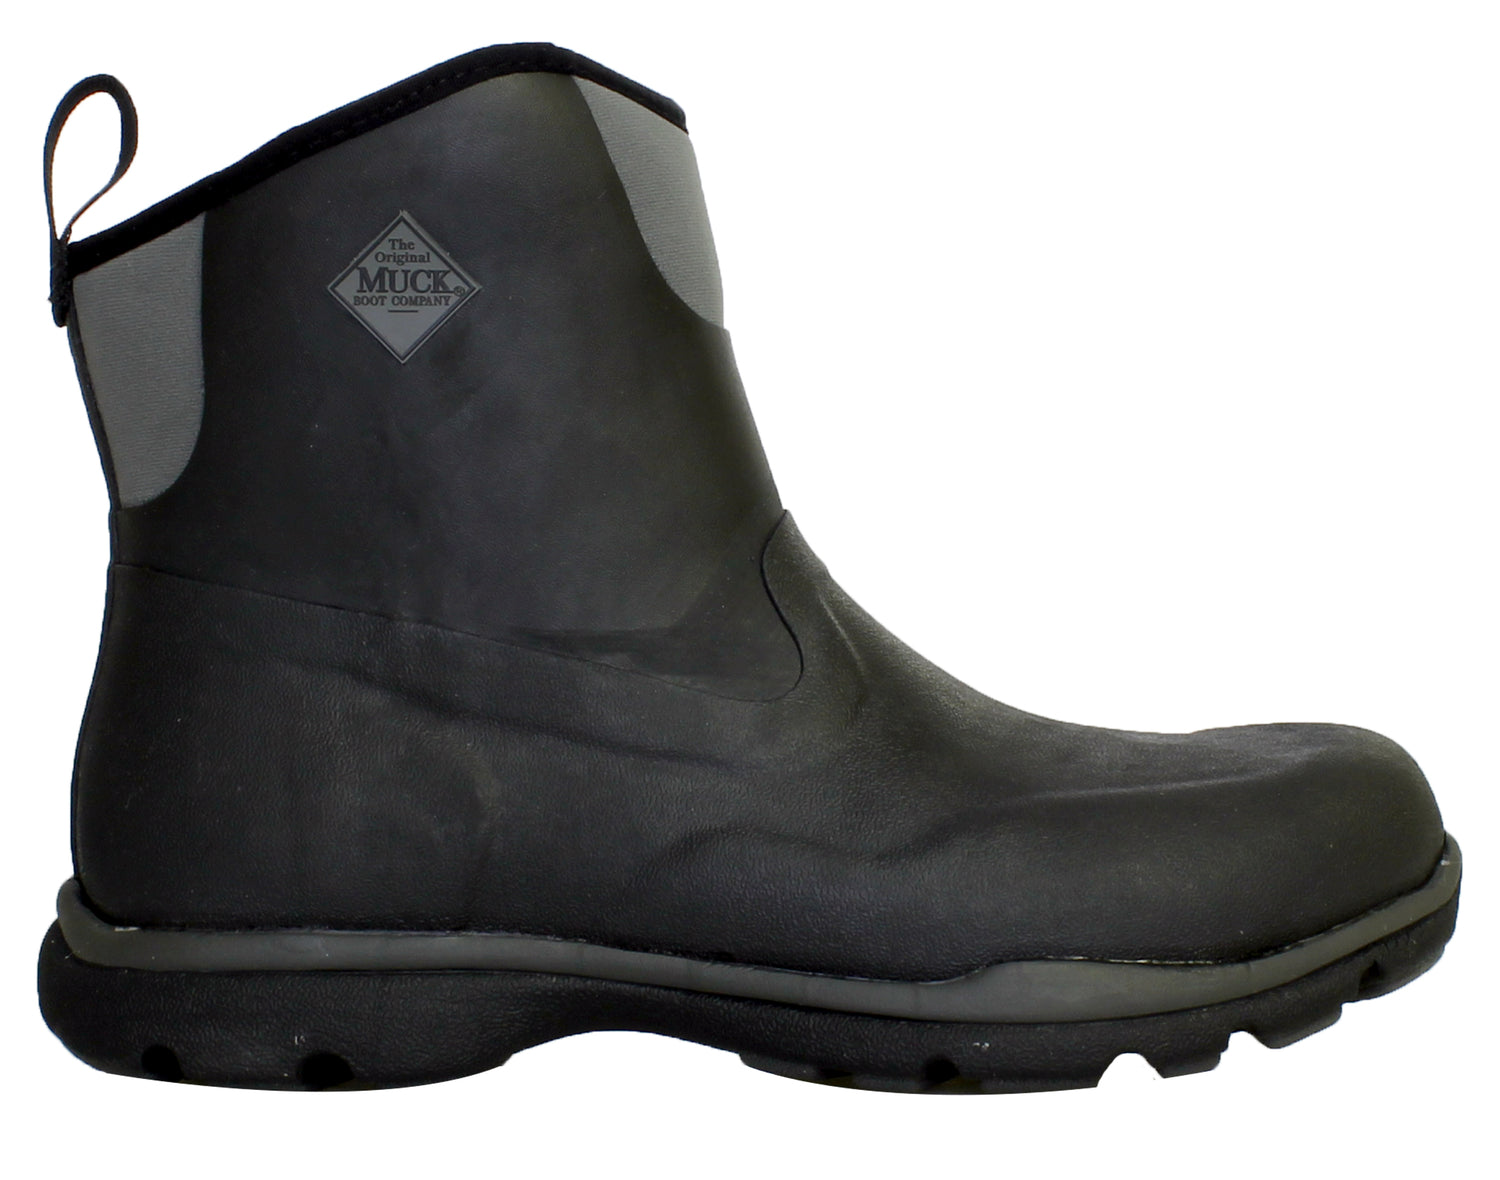 Muck Boots Excursion Pro Mid Waterproof Men's Boots